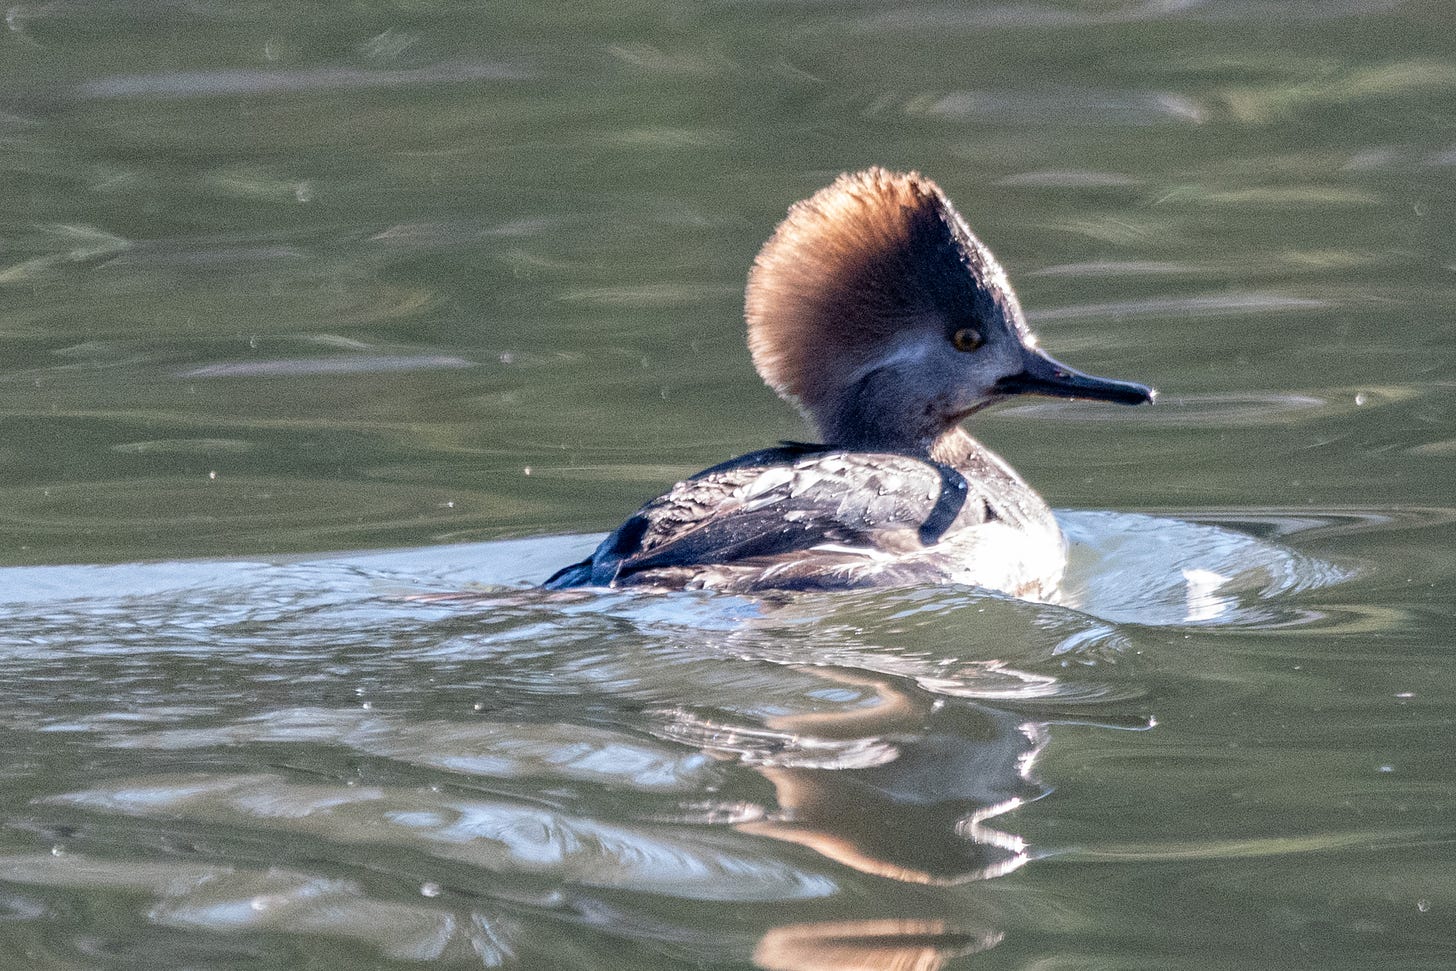 A female hooded merganser, punk hairdo in full bristle and illuminated from behind by the sun, swims away from the viewer as she looks back over her shoulder